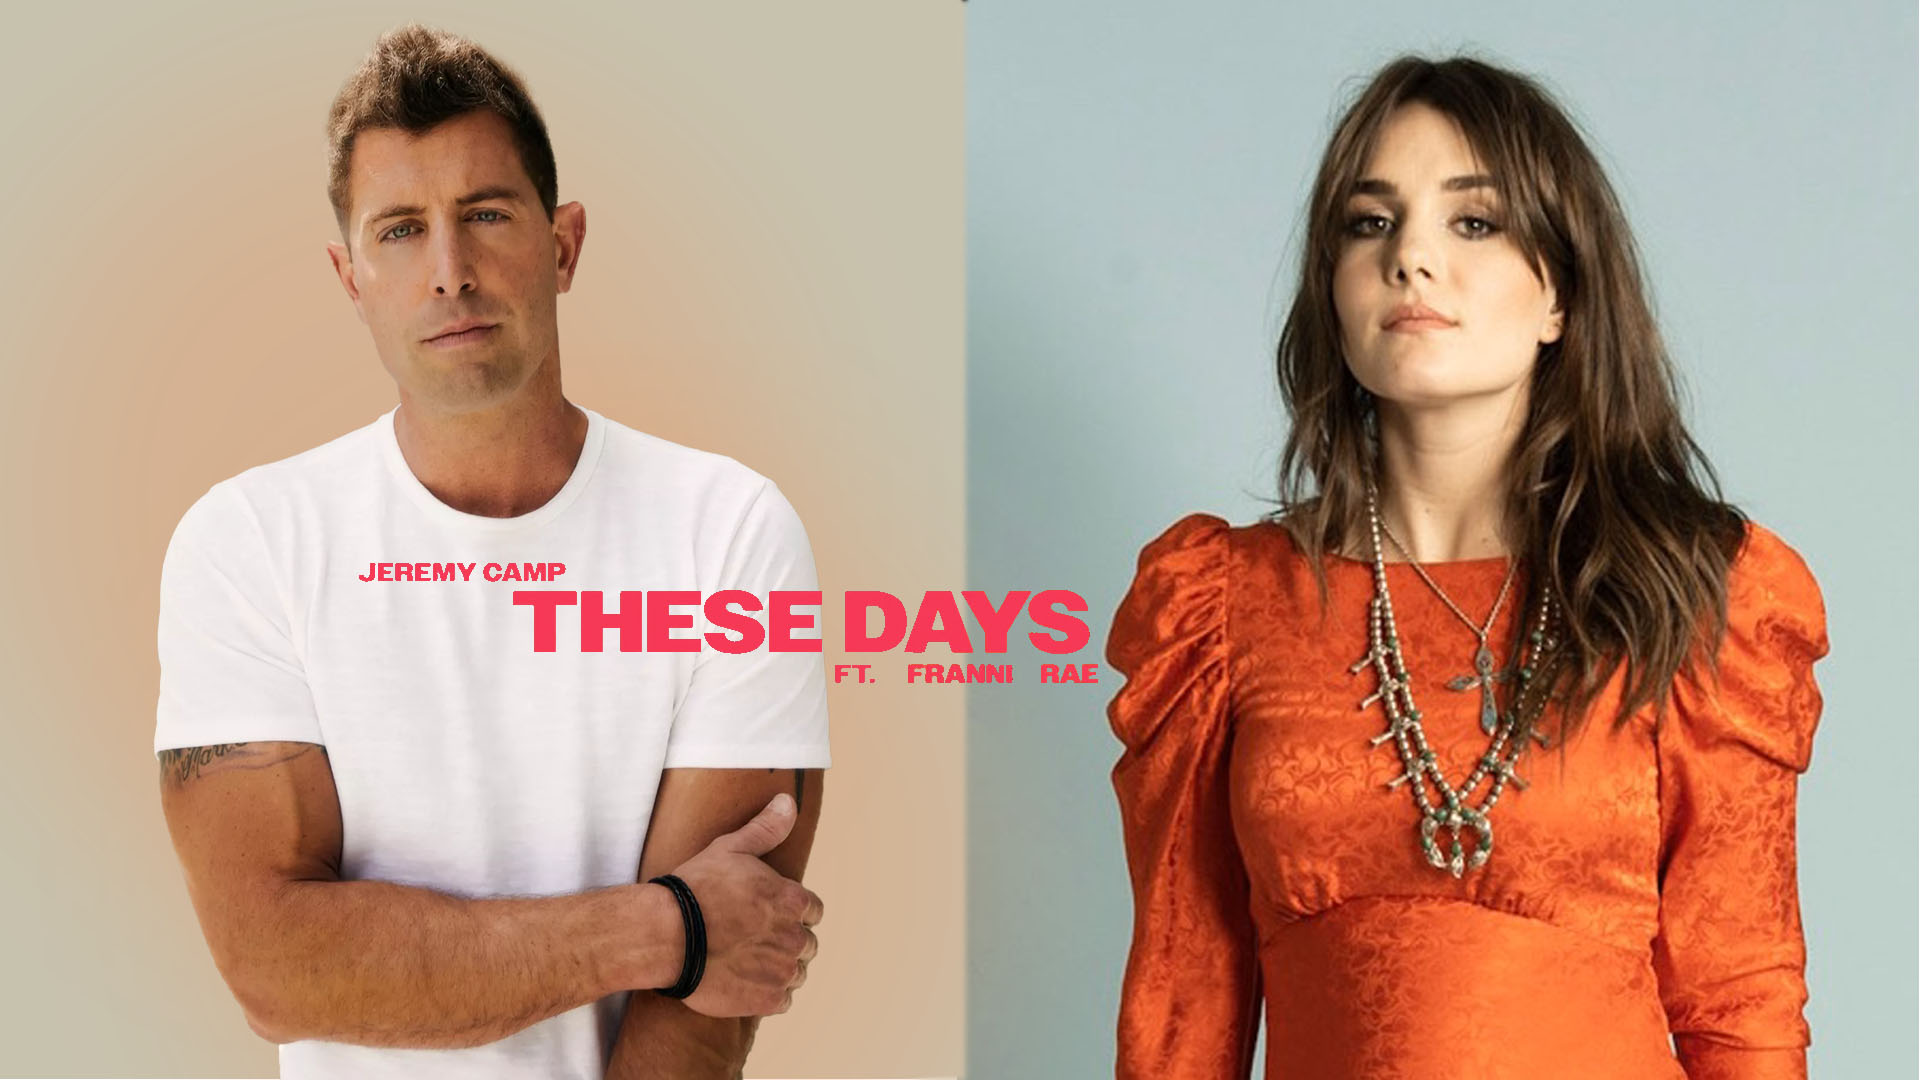 Jeremy and Camp and Franni Rae Cash collab on new song "These Days"